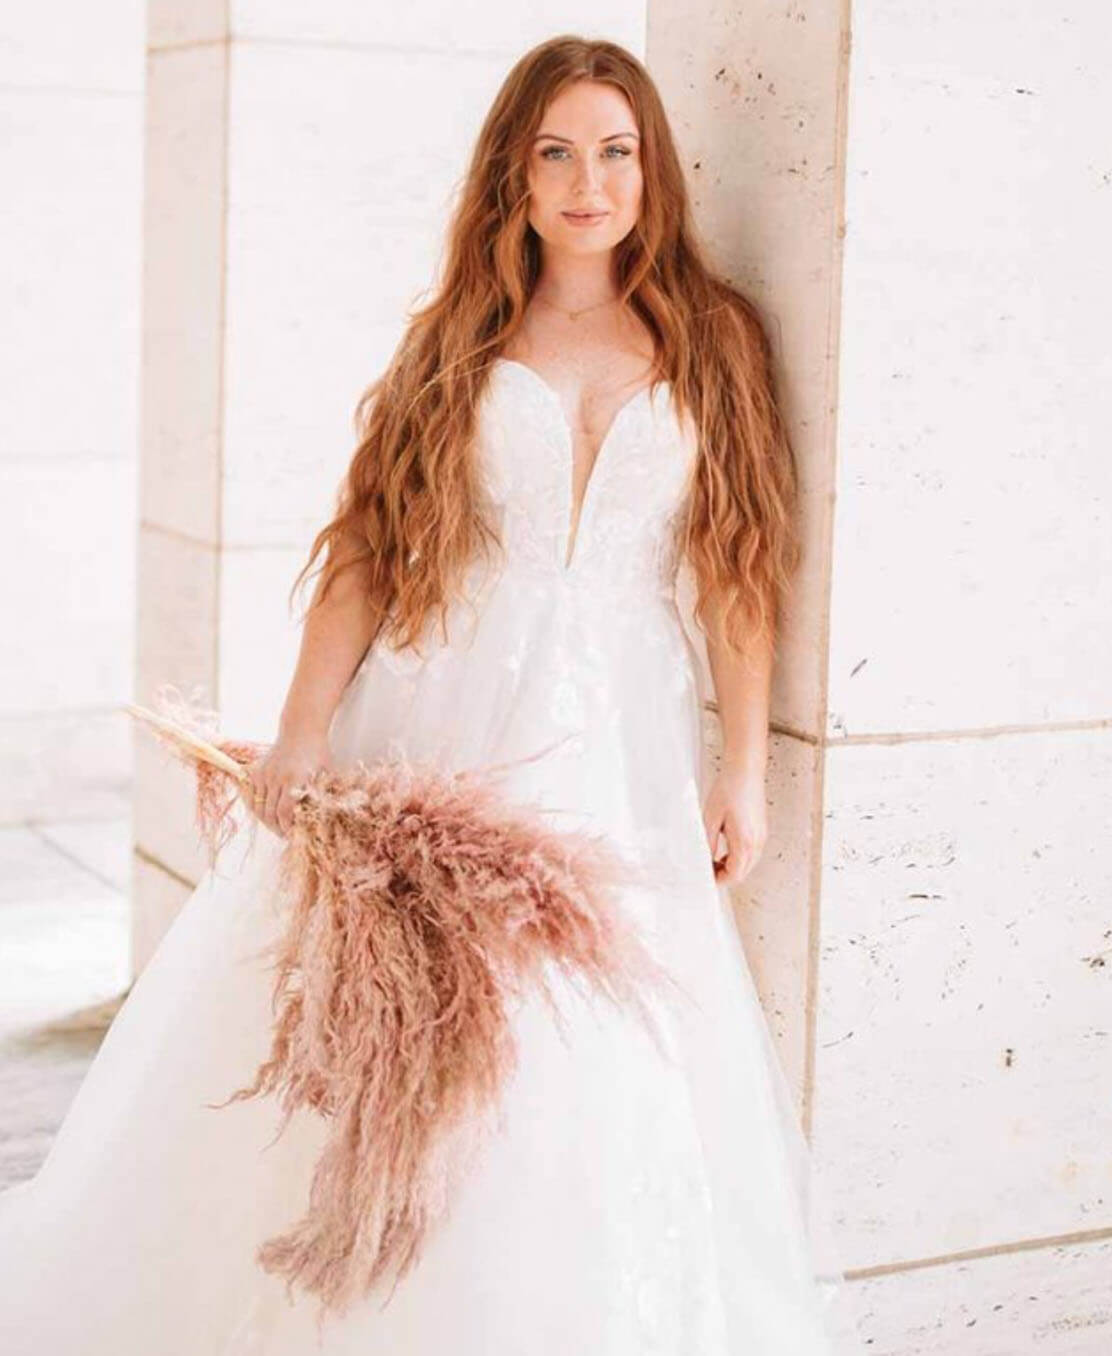 Model wearing a white gown by Stella York. Mobile image